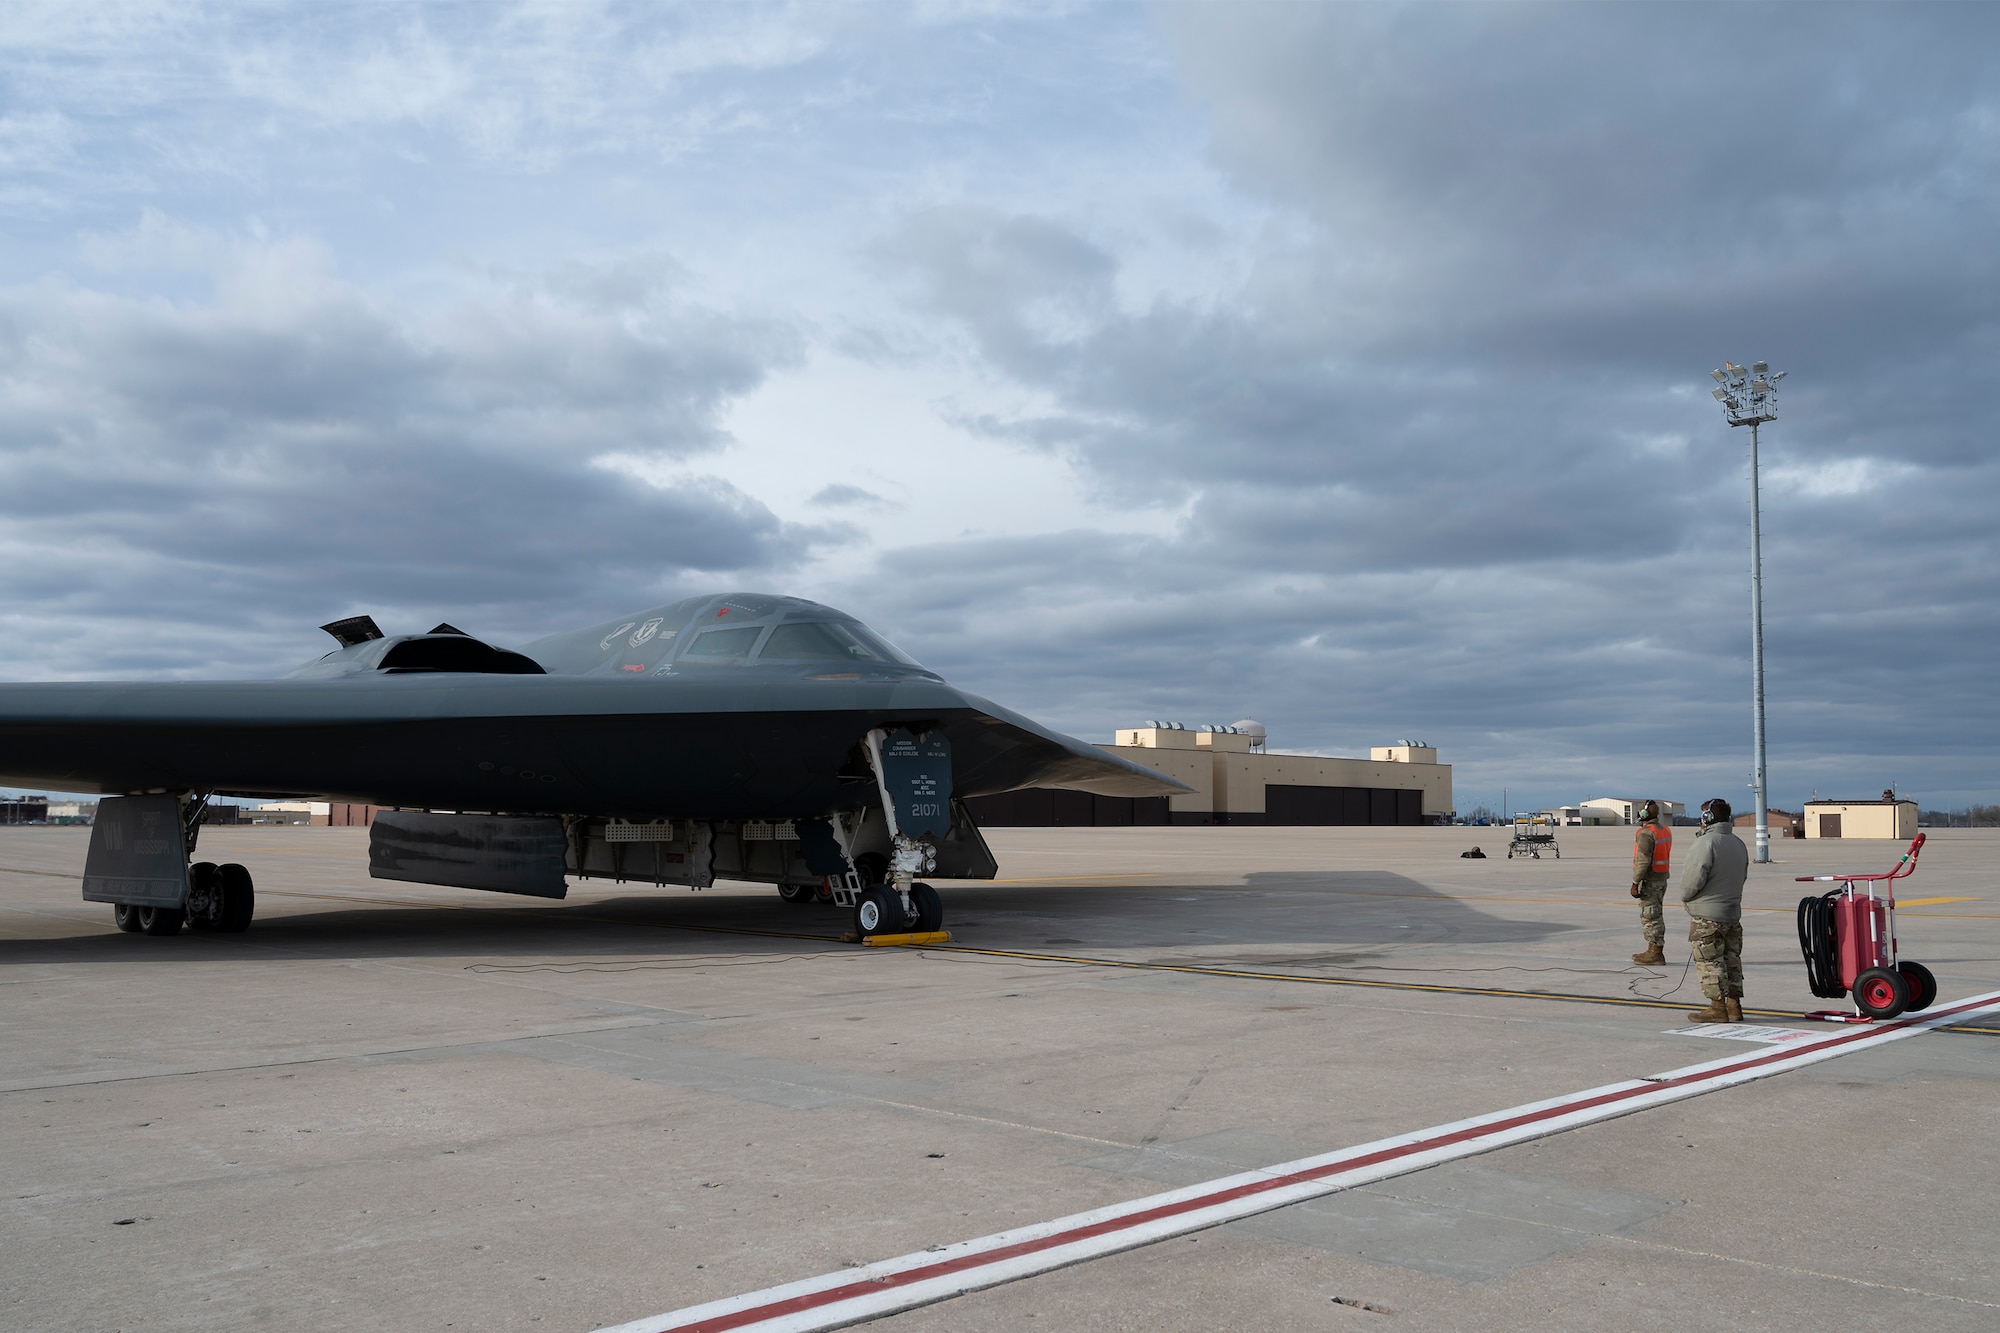 Lt. Col. Drew Irmischer, 131st Bomb Wing pilot, prepares to take off in a B-2 Spirit stealth bomber Jan. 27, 2022, at Whiteman Air Force Base, Missouri. Irmischer surpassed 1500 flight hours on this sortie, becoming one of only 17th aviators to achieve that distinction. (U.S. Air National Guard photo by Master Sgt. John E. Hillier)